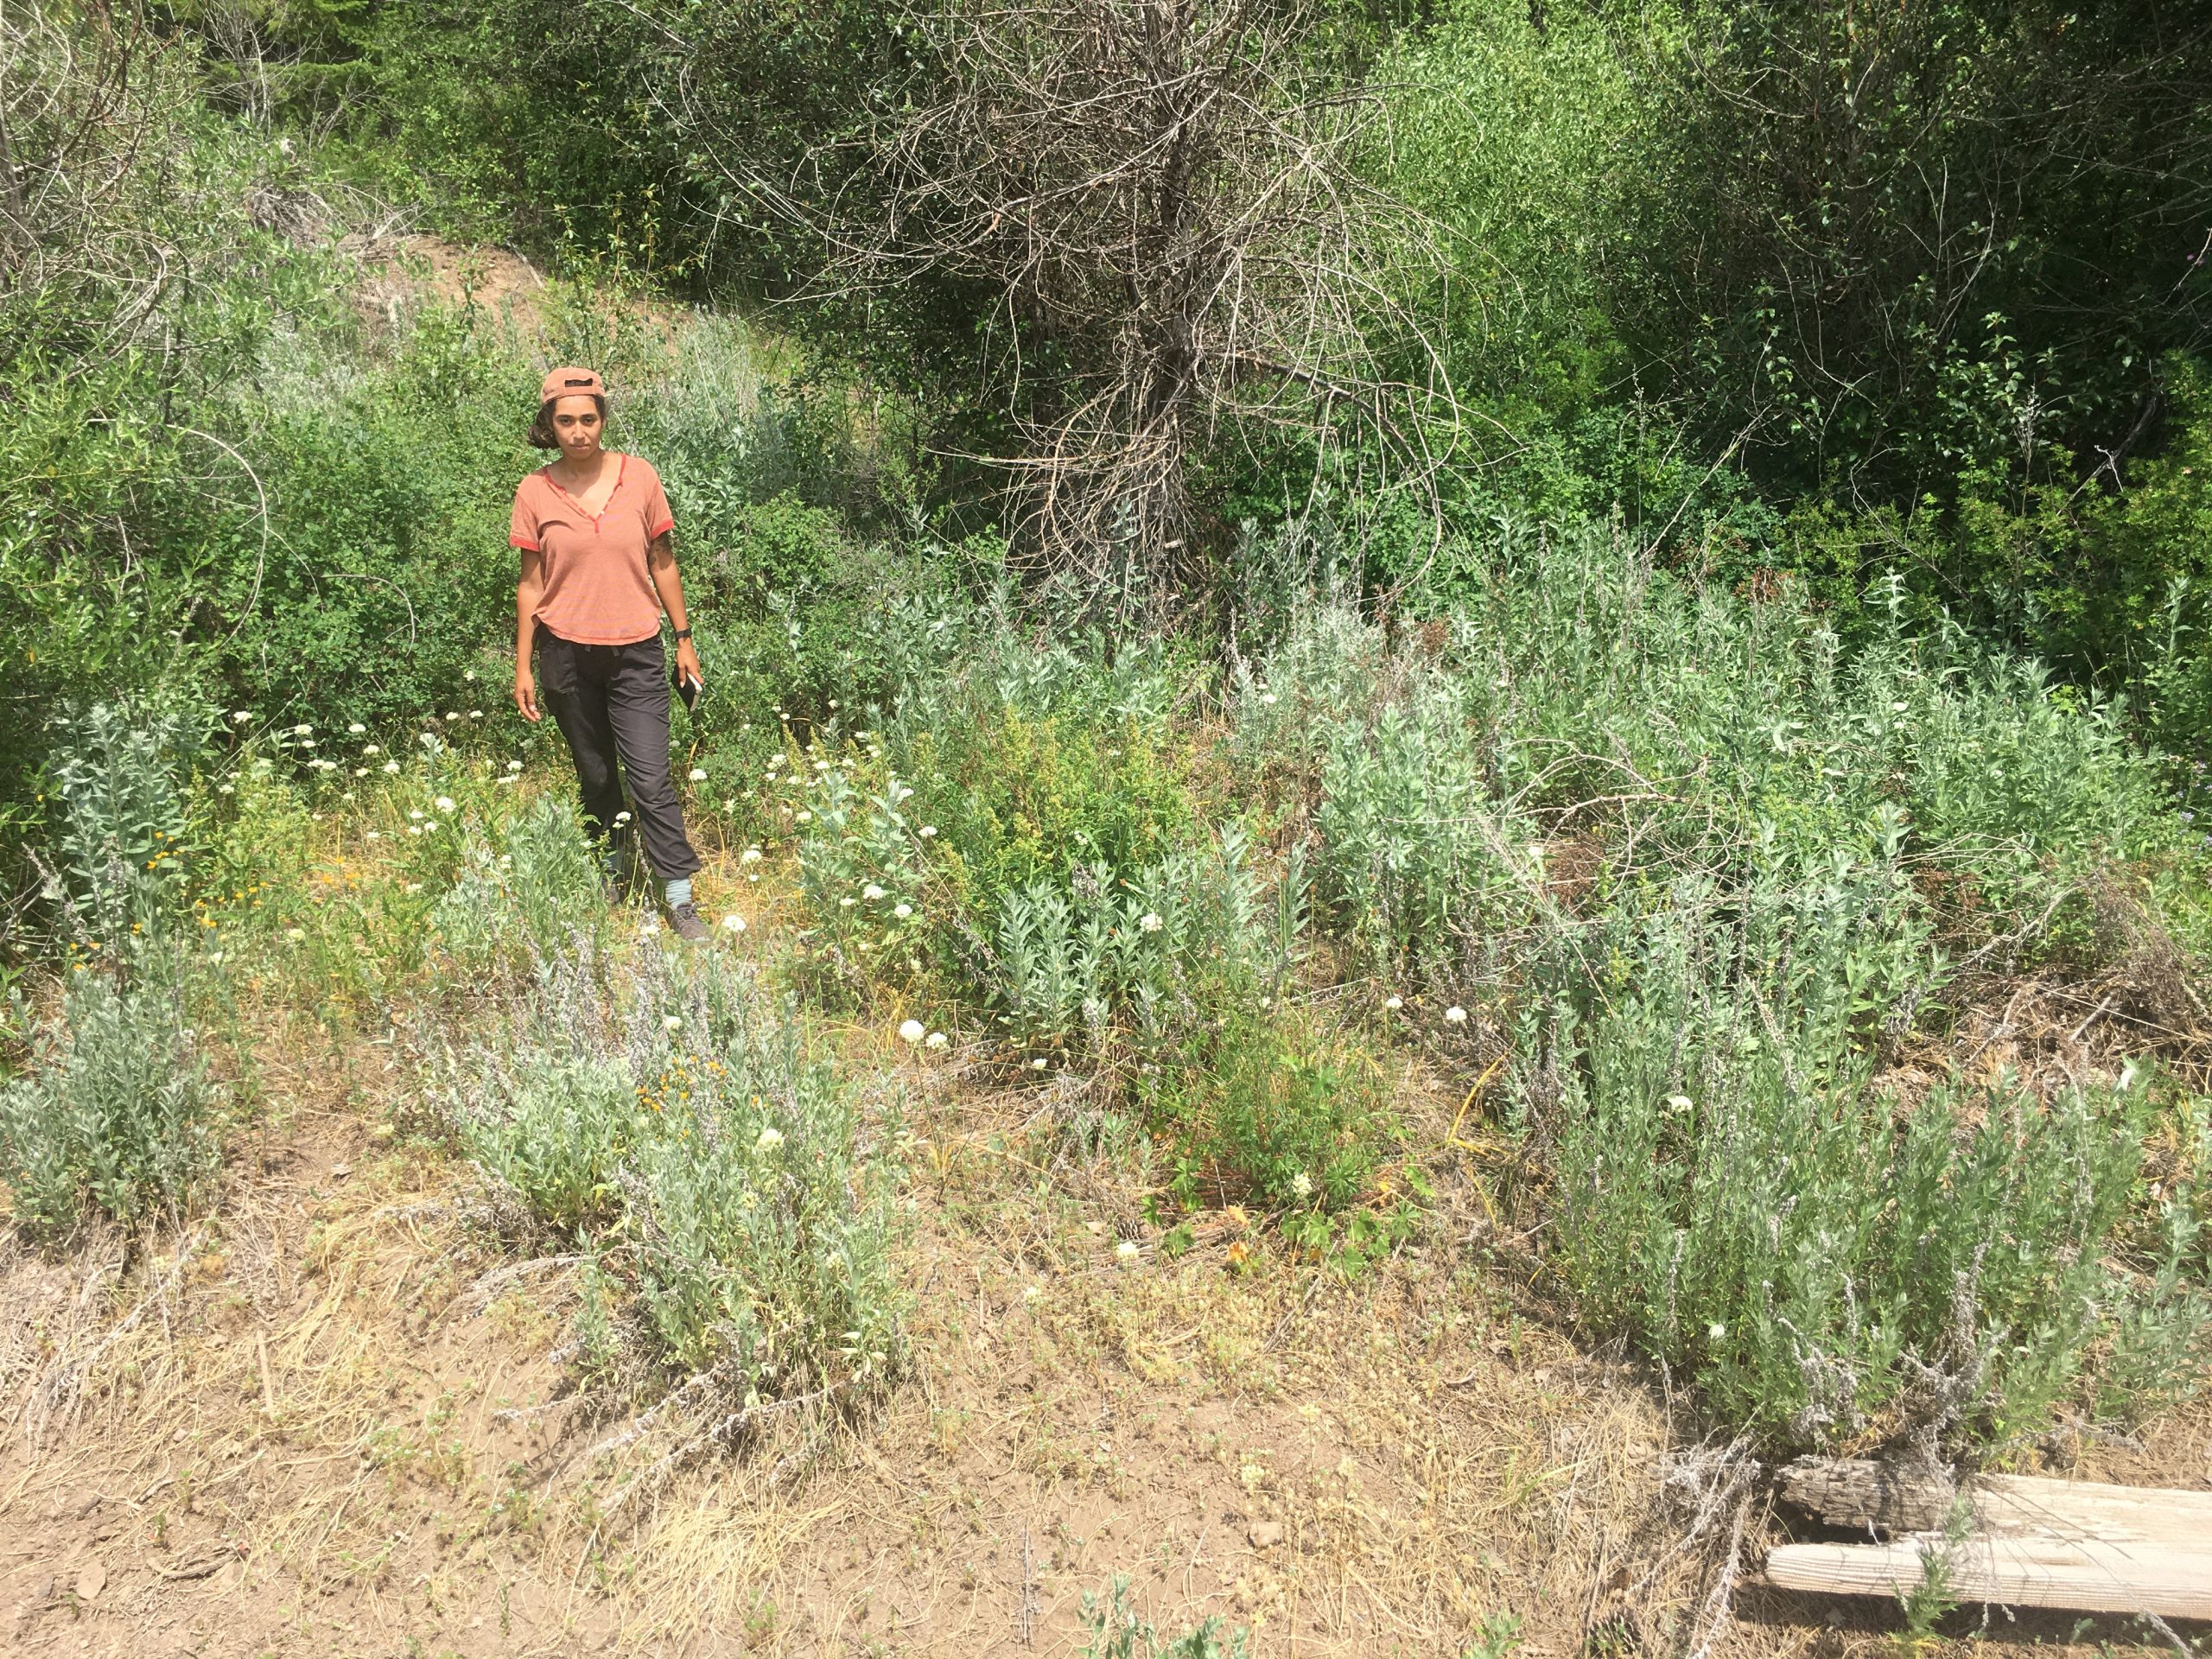 A young woman in small clearing with various wildflowers and shrubs.